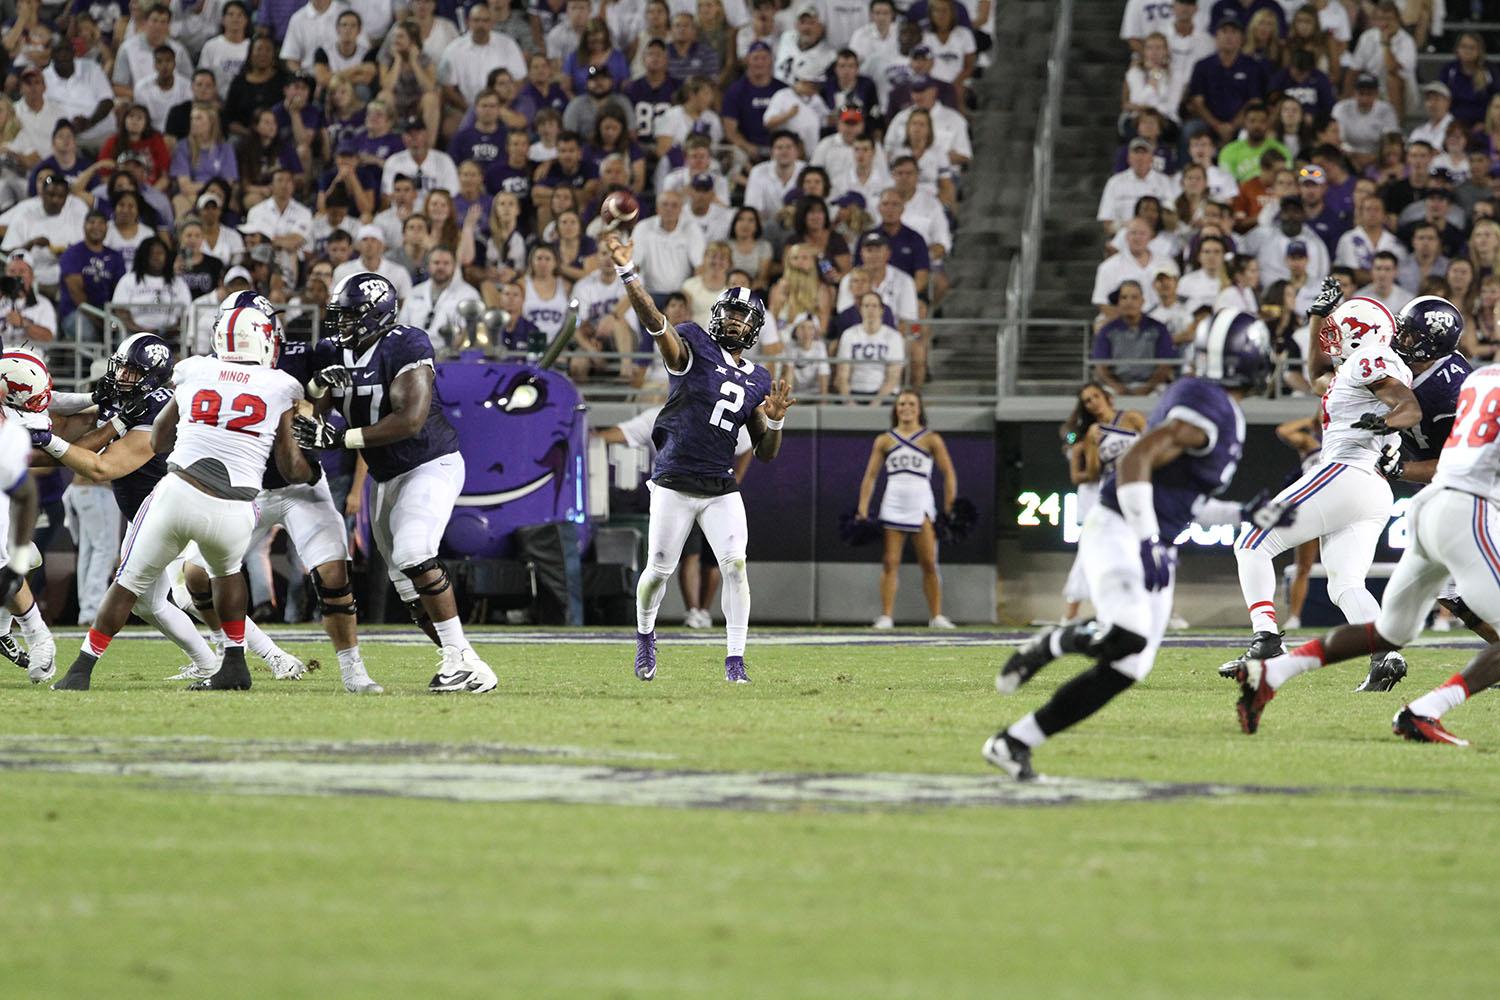 The+Frogs+withstood+20+unanswered+SMU+points+in+the+second+half+to+move+to+3-0.+